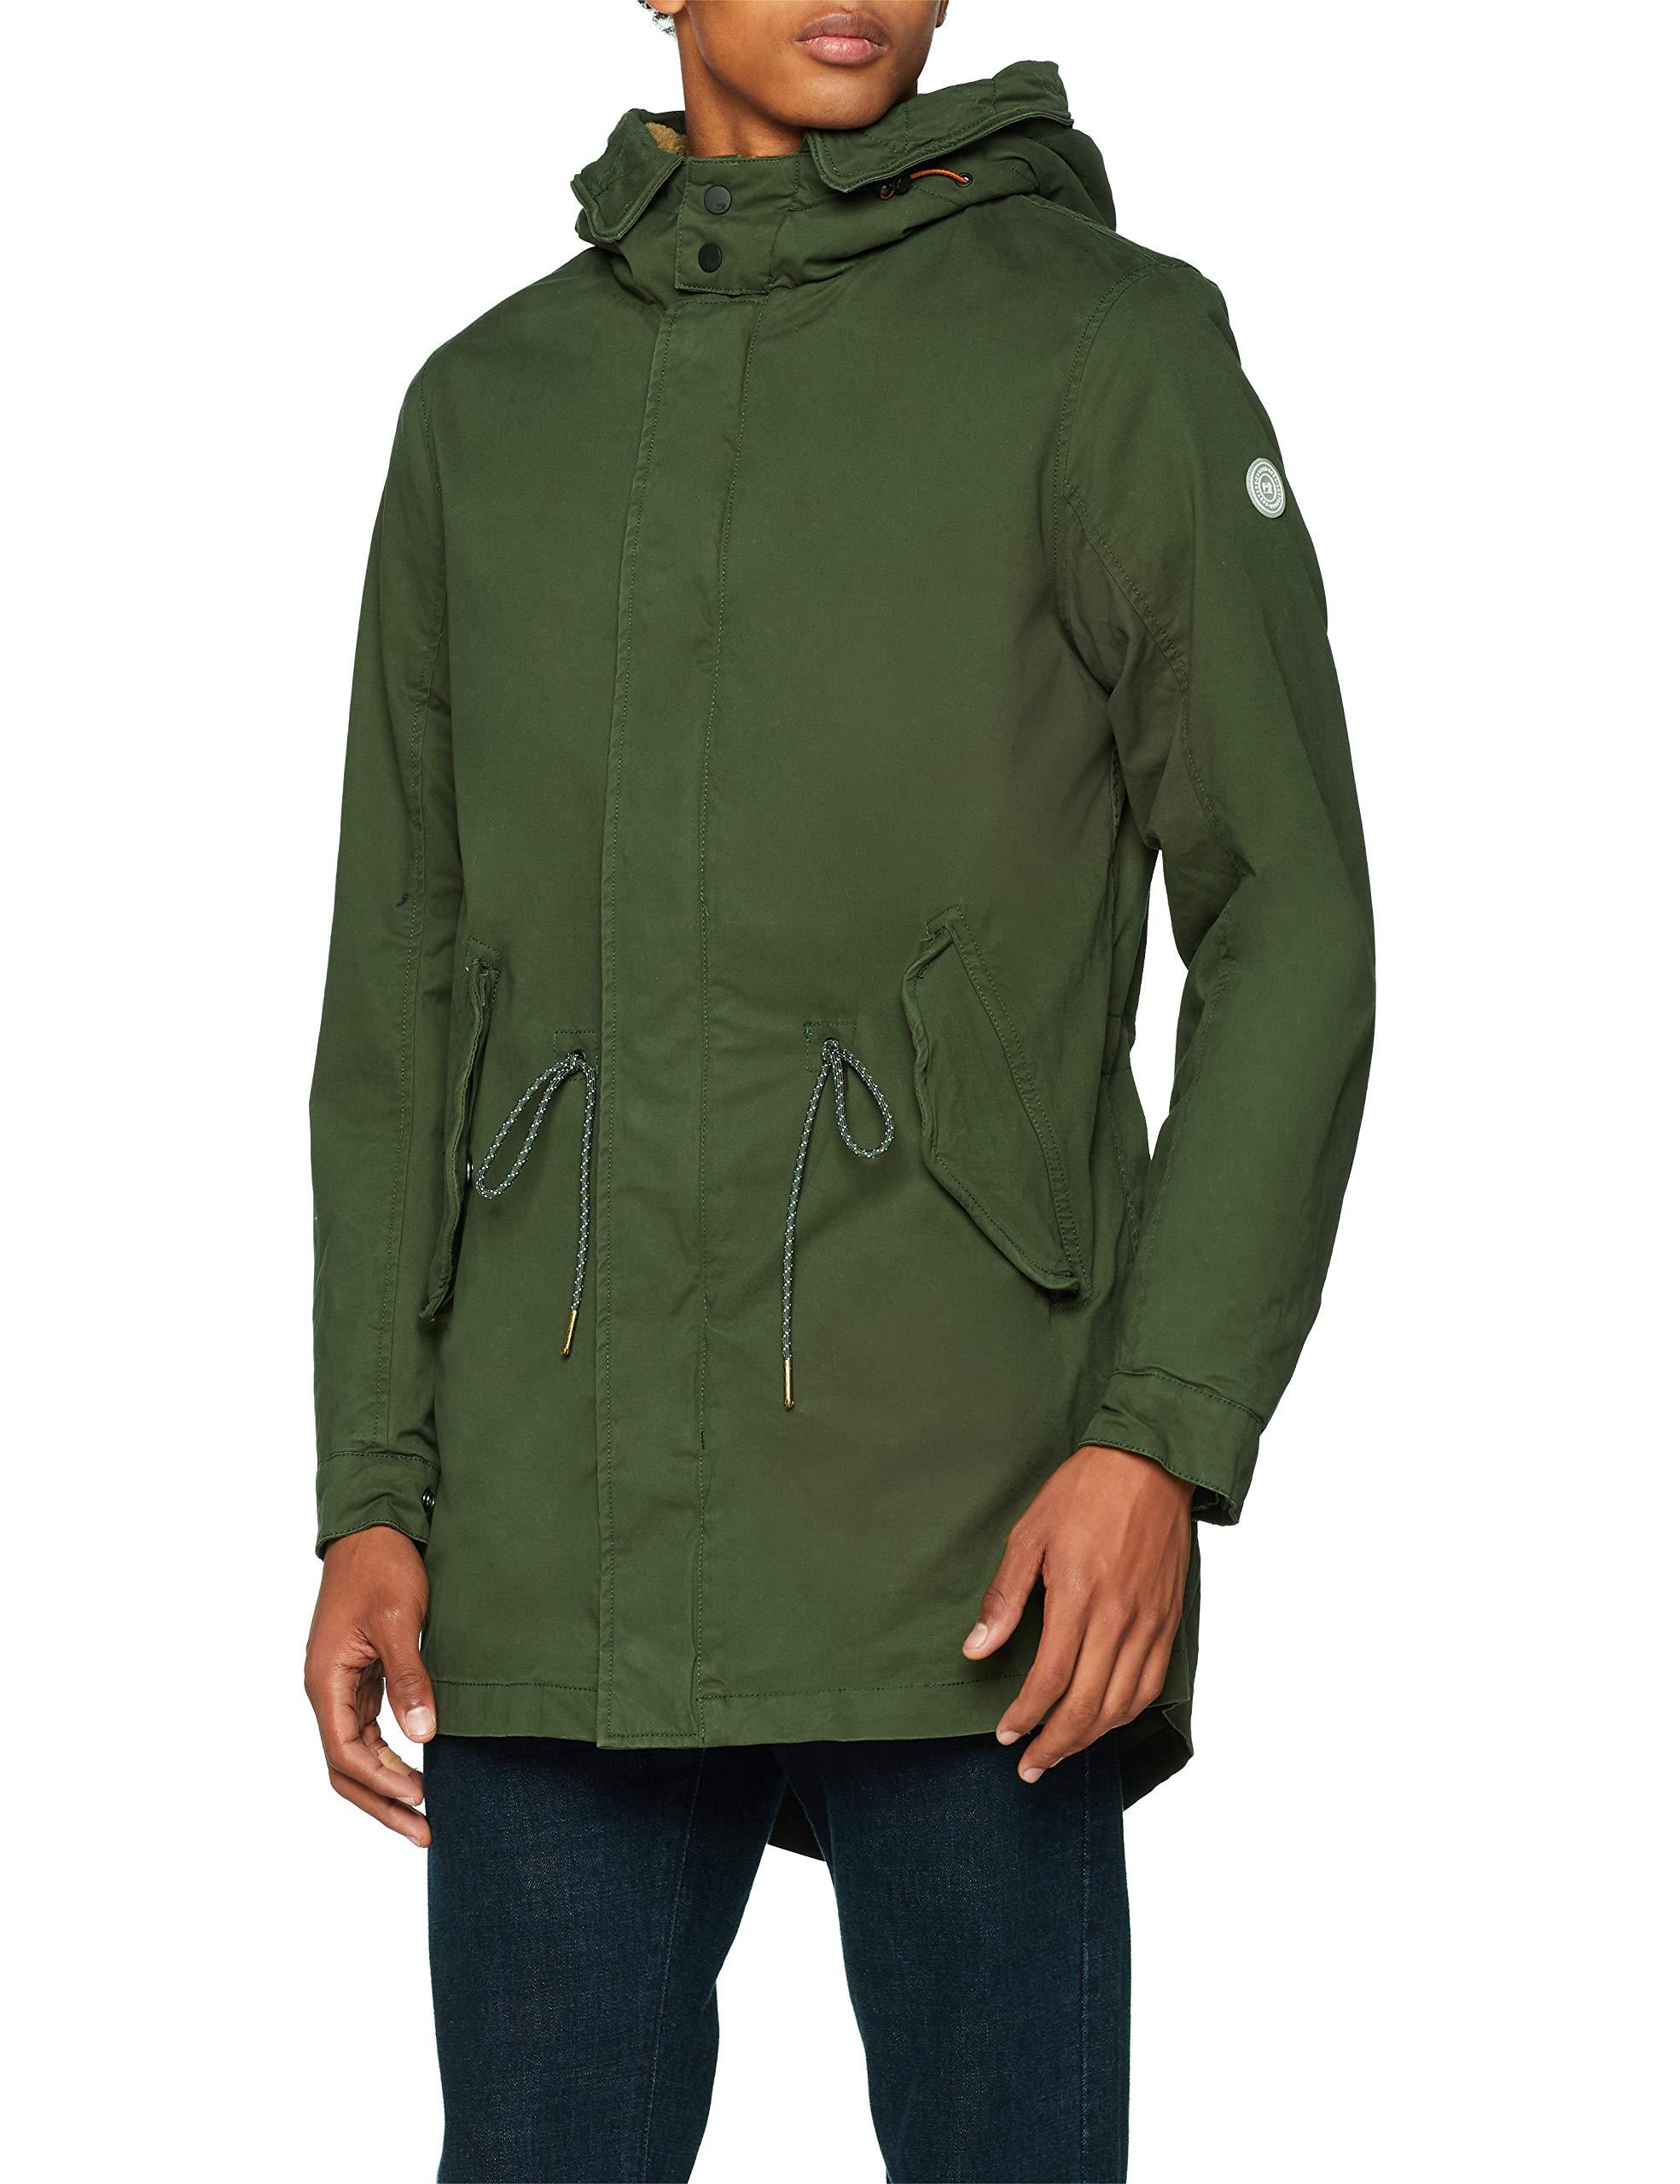 Scotch & Soda Classic Hooded Parka With Teddy Lining in Green for Men - Lyst